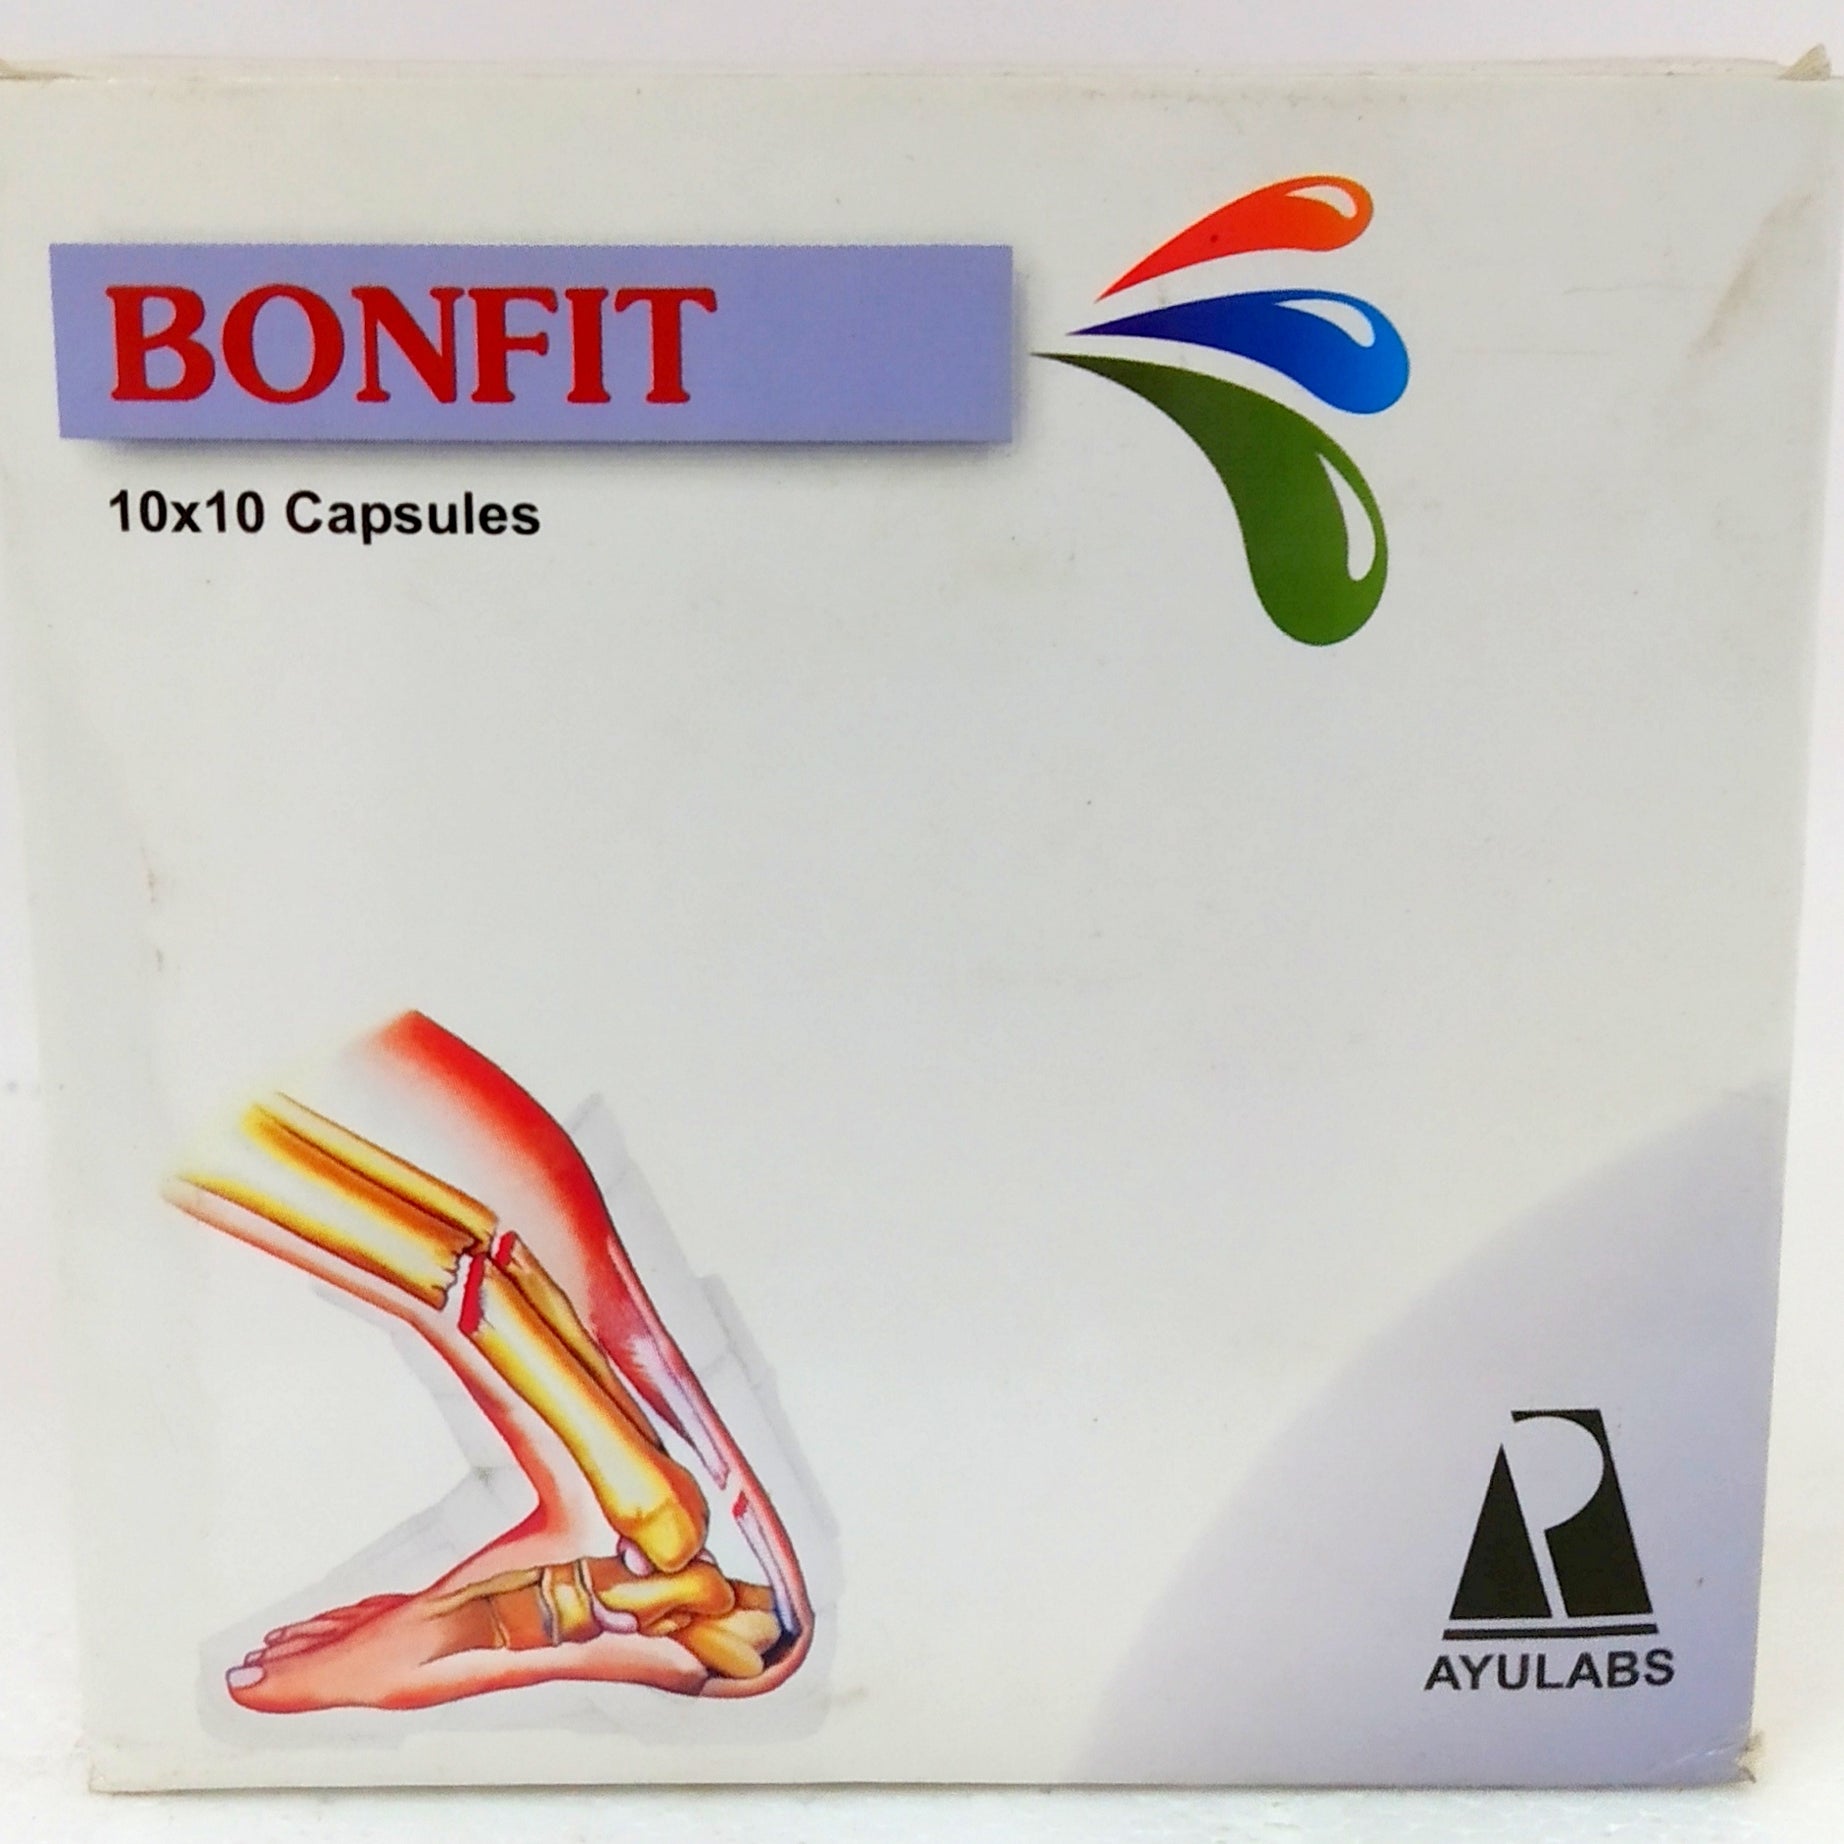 Shop Bonfit 10Capsules at price 45.00 from Ayulabs Online - Ayush Care